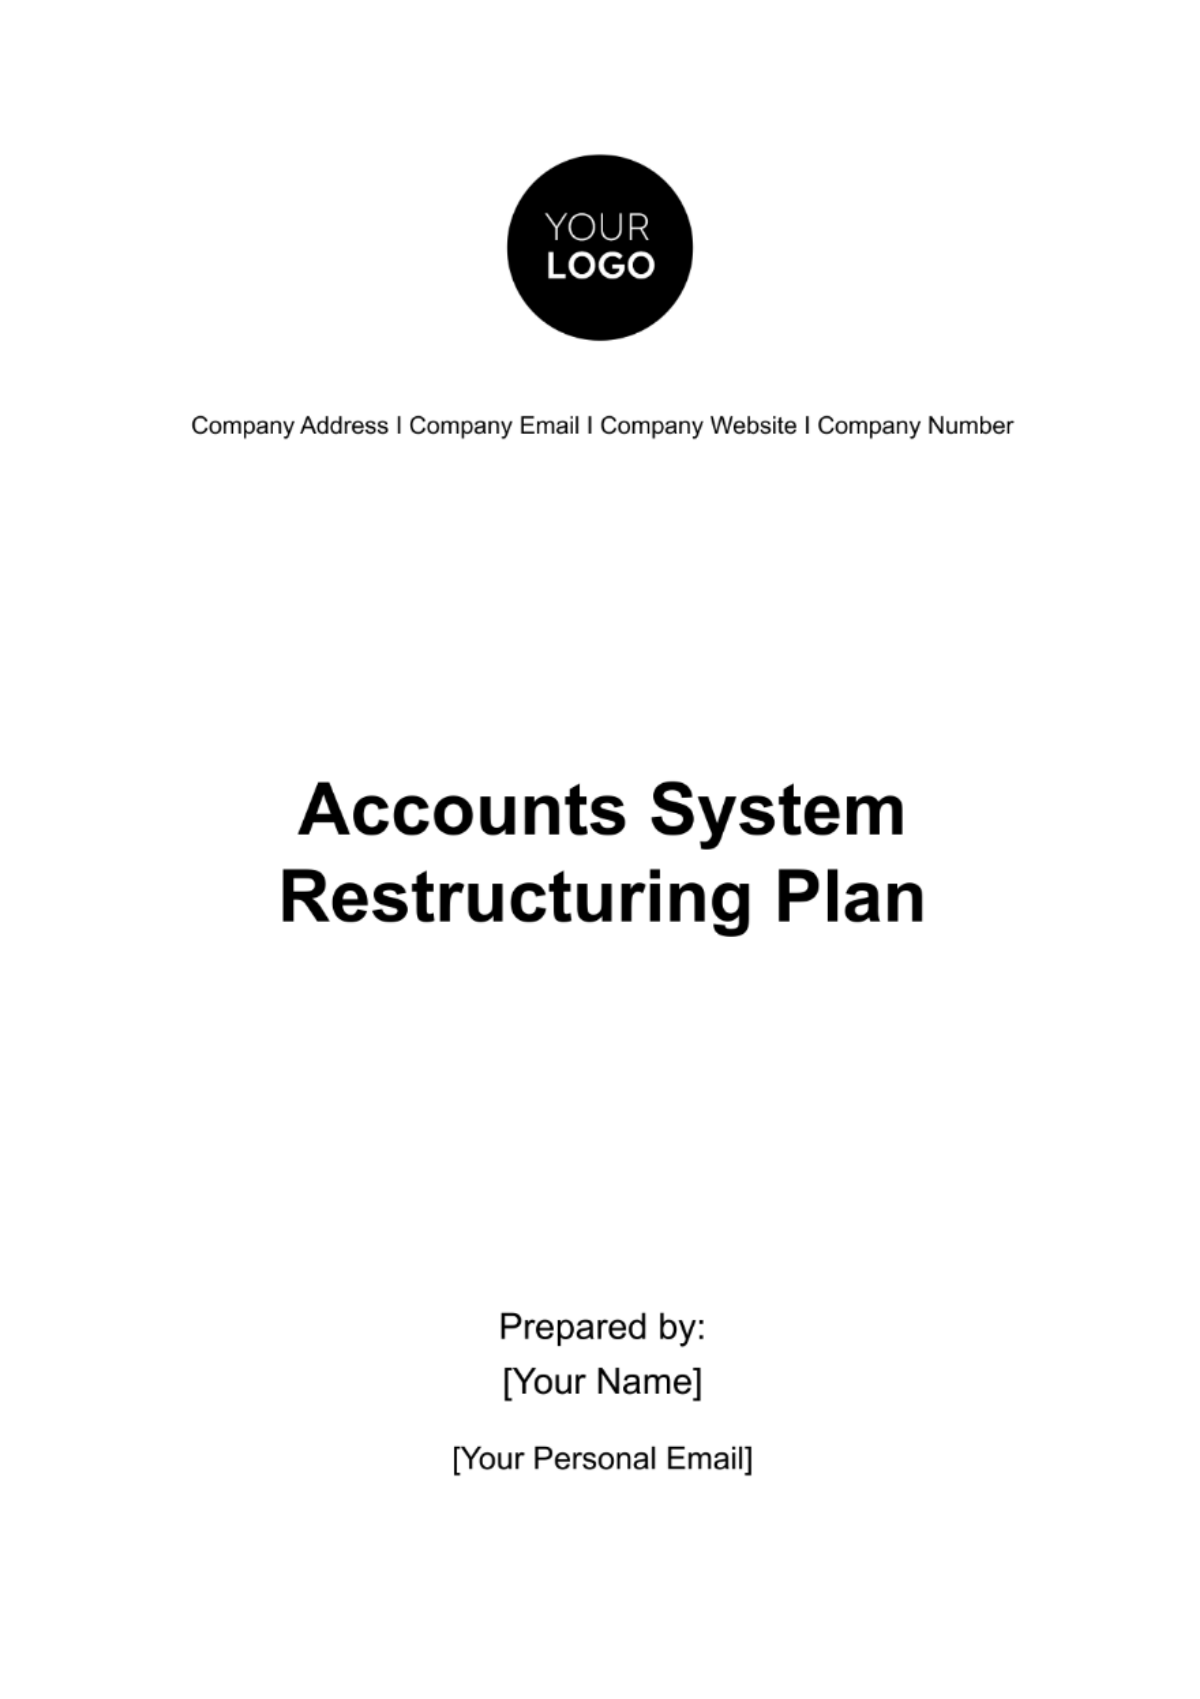 Accounts System Restructuring Plan Template